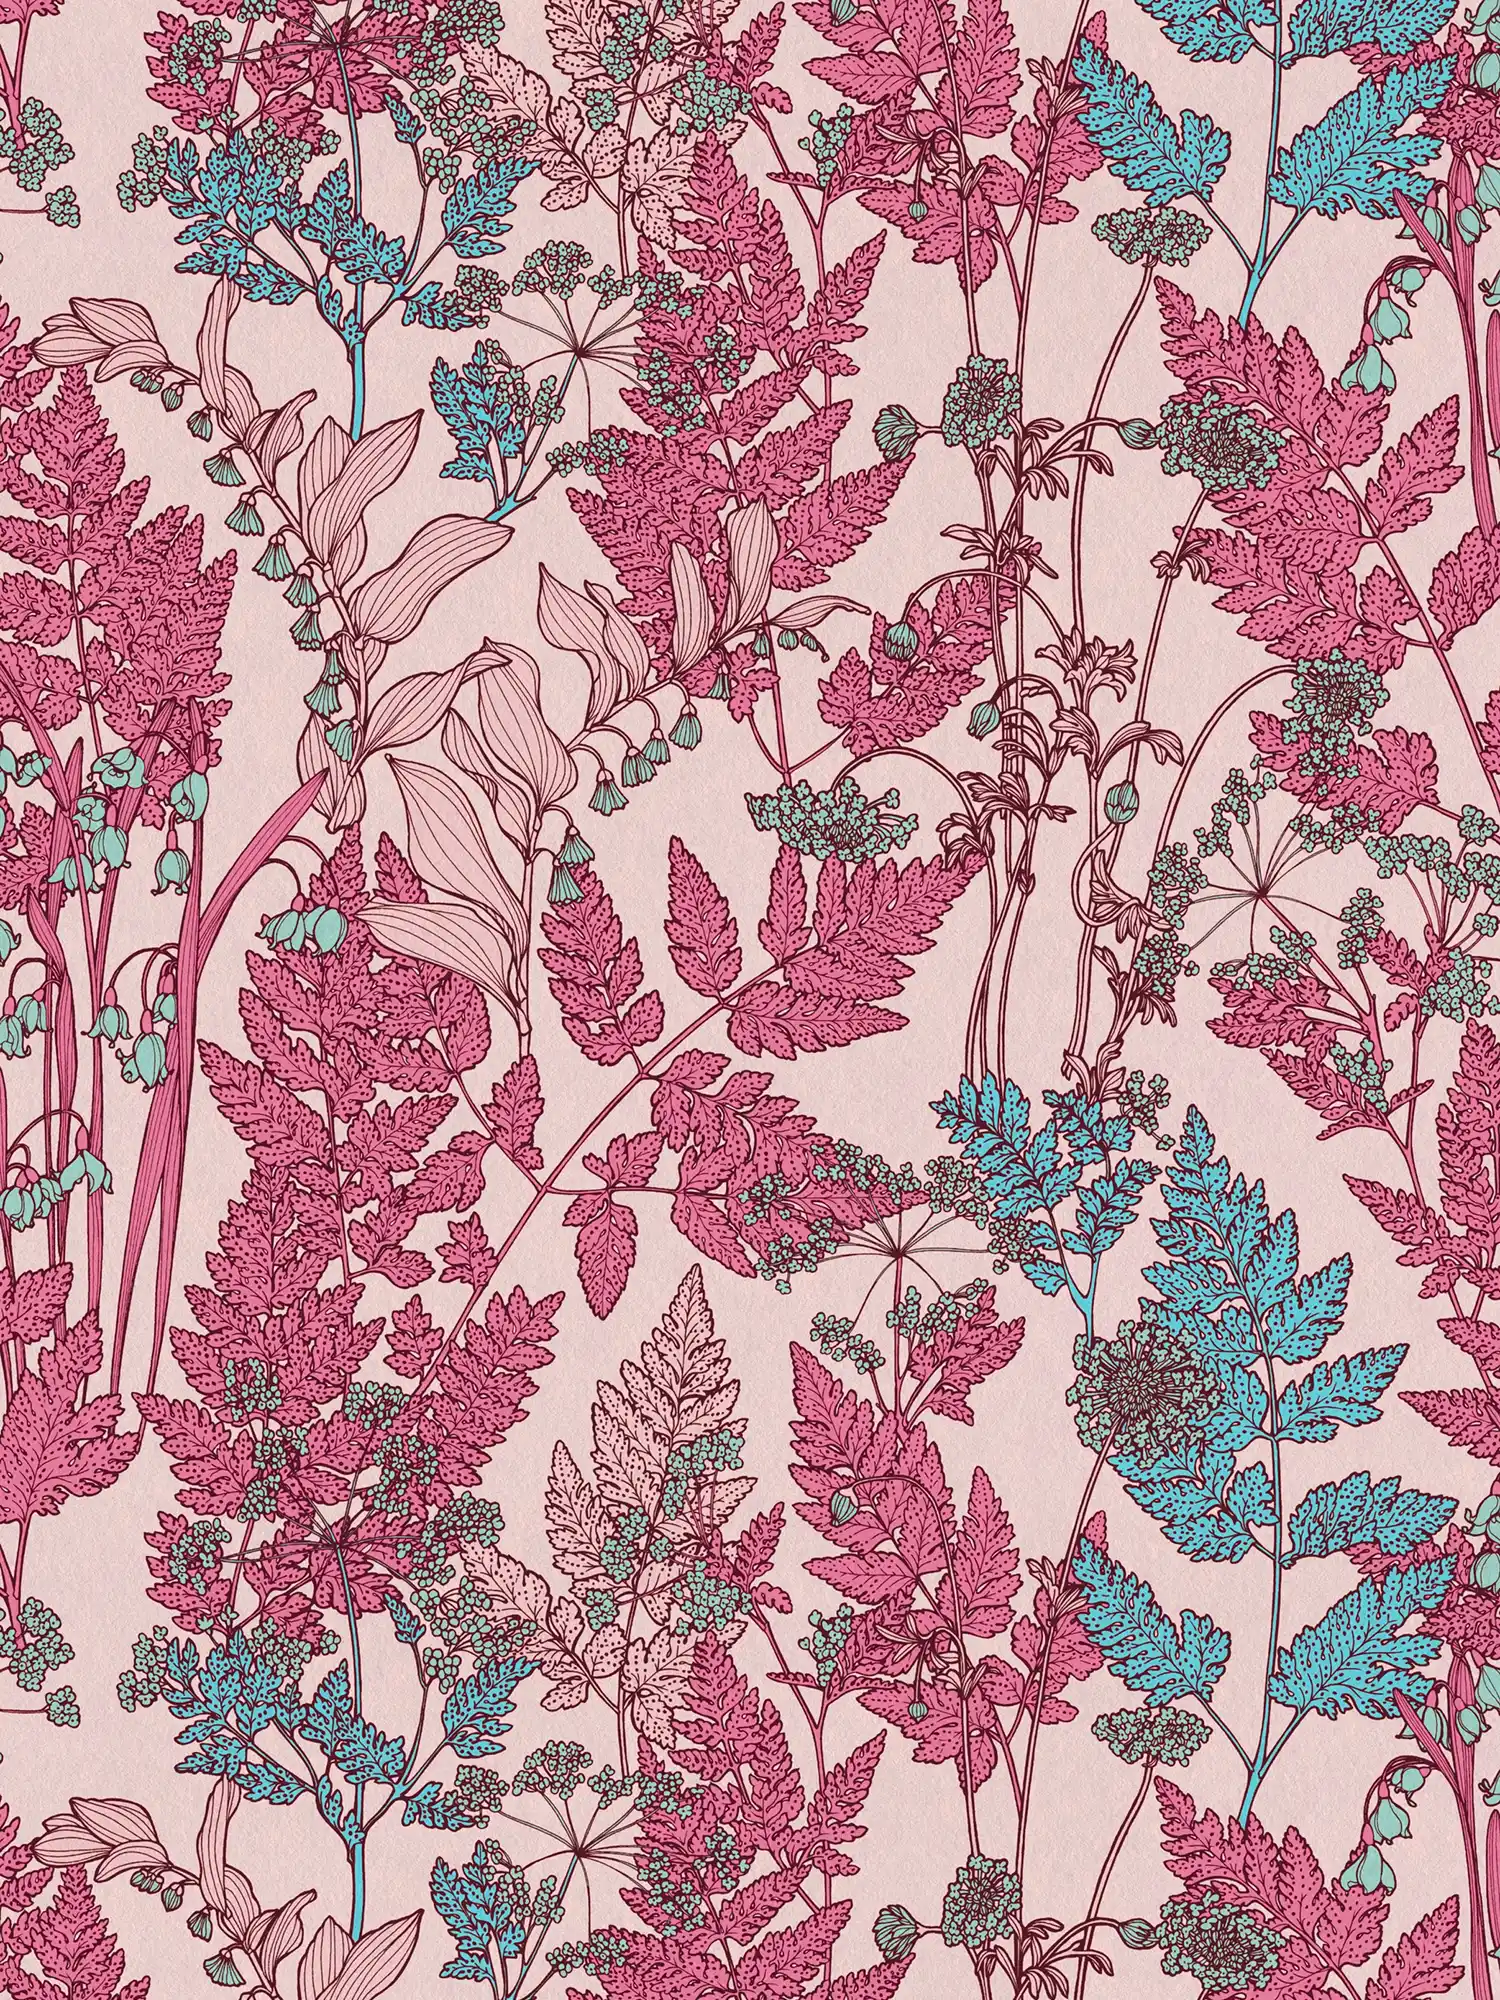             Pink floral wallpaper with floral design in botanical style - pink, red, blue
        